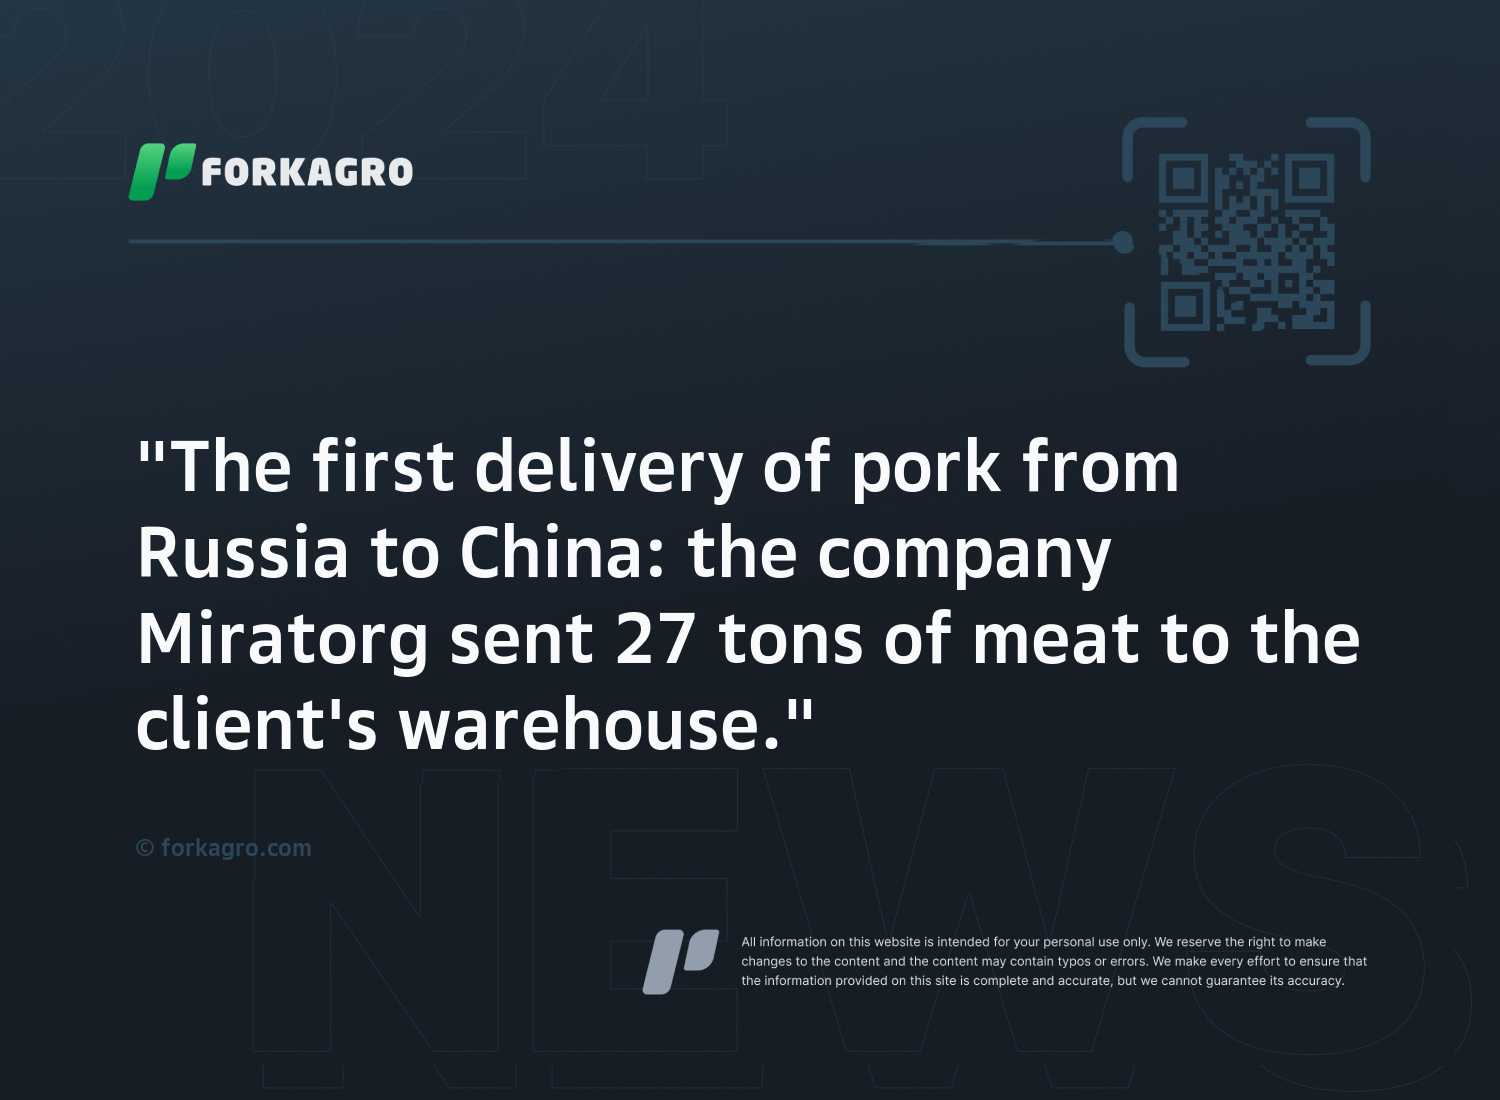 "The first delivery of pork from Russia to China: the company Miratorg sent 27 tons of meat to the client's warehouse."